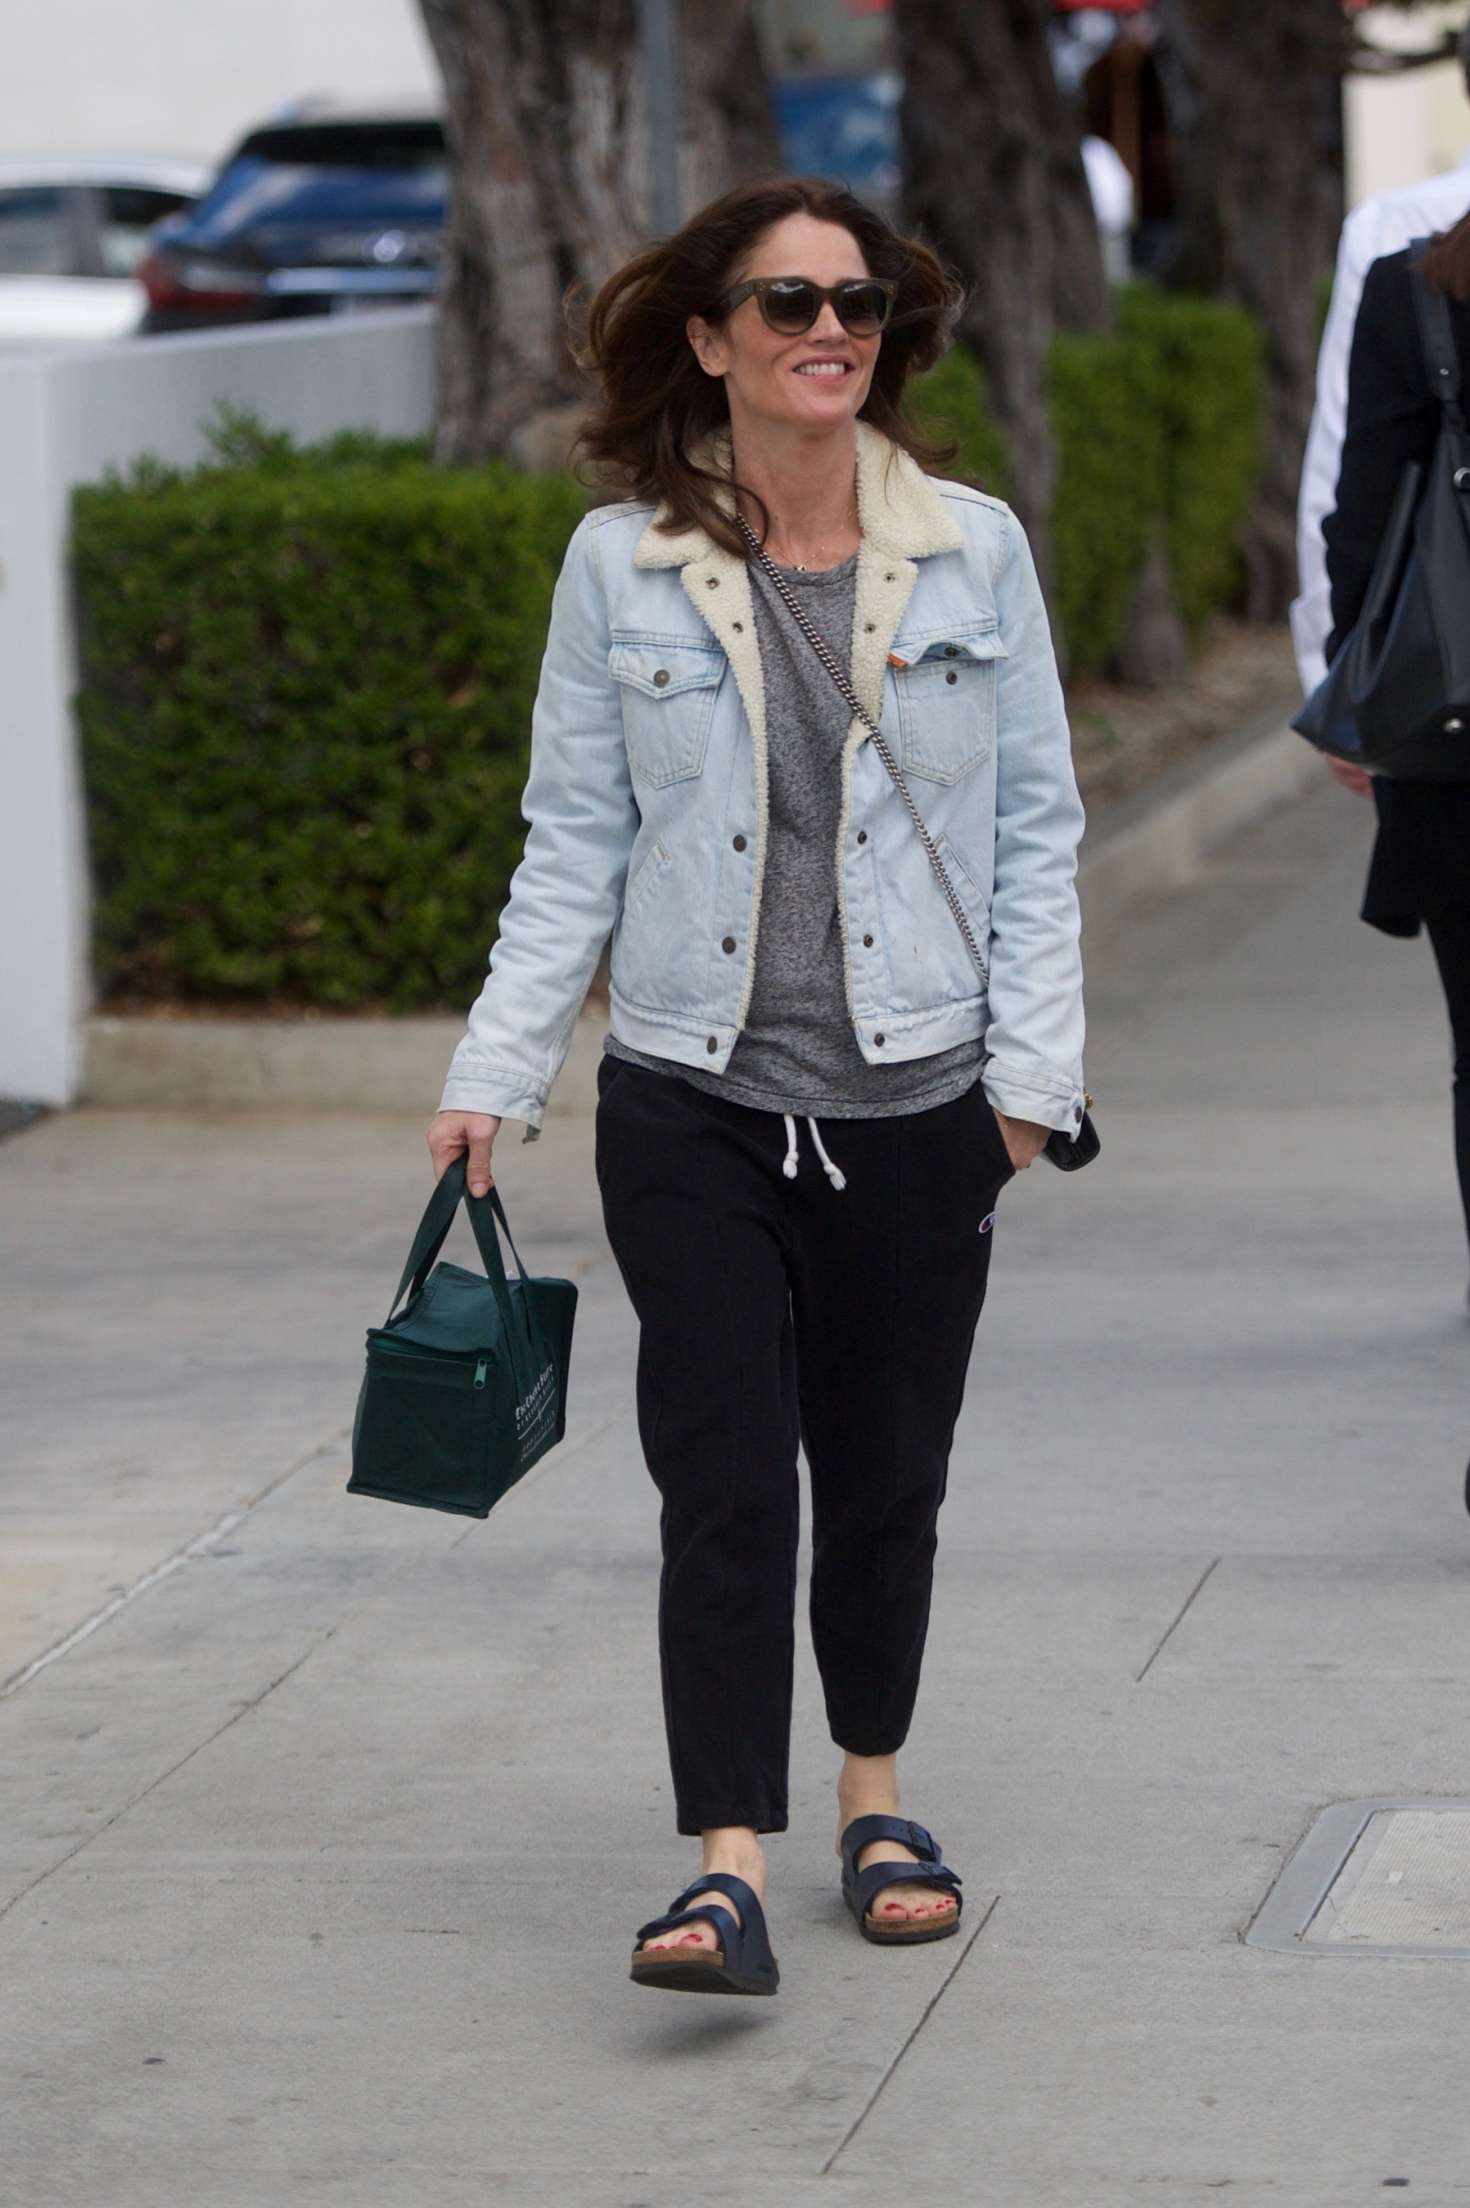 Robin Tunney 2018 : Robin Tunney out in Beverly Hills -01. 